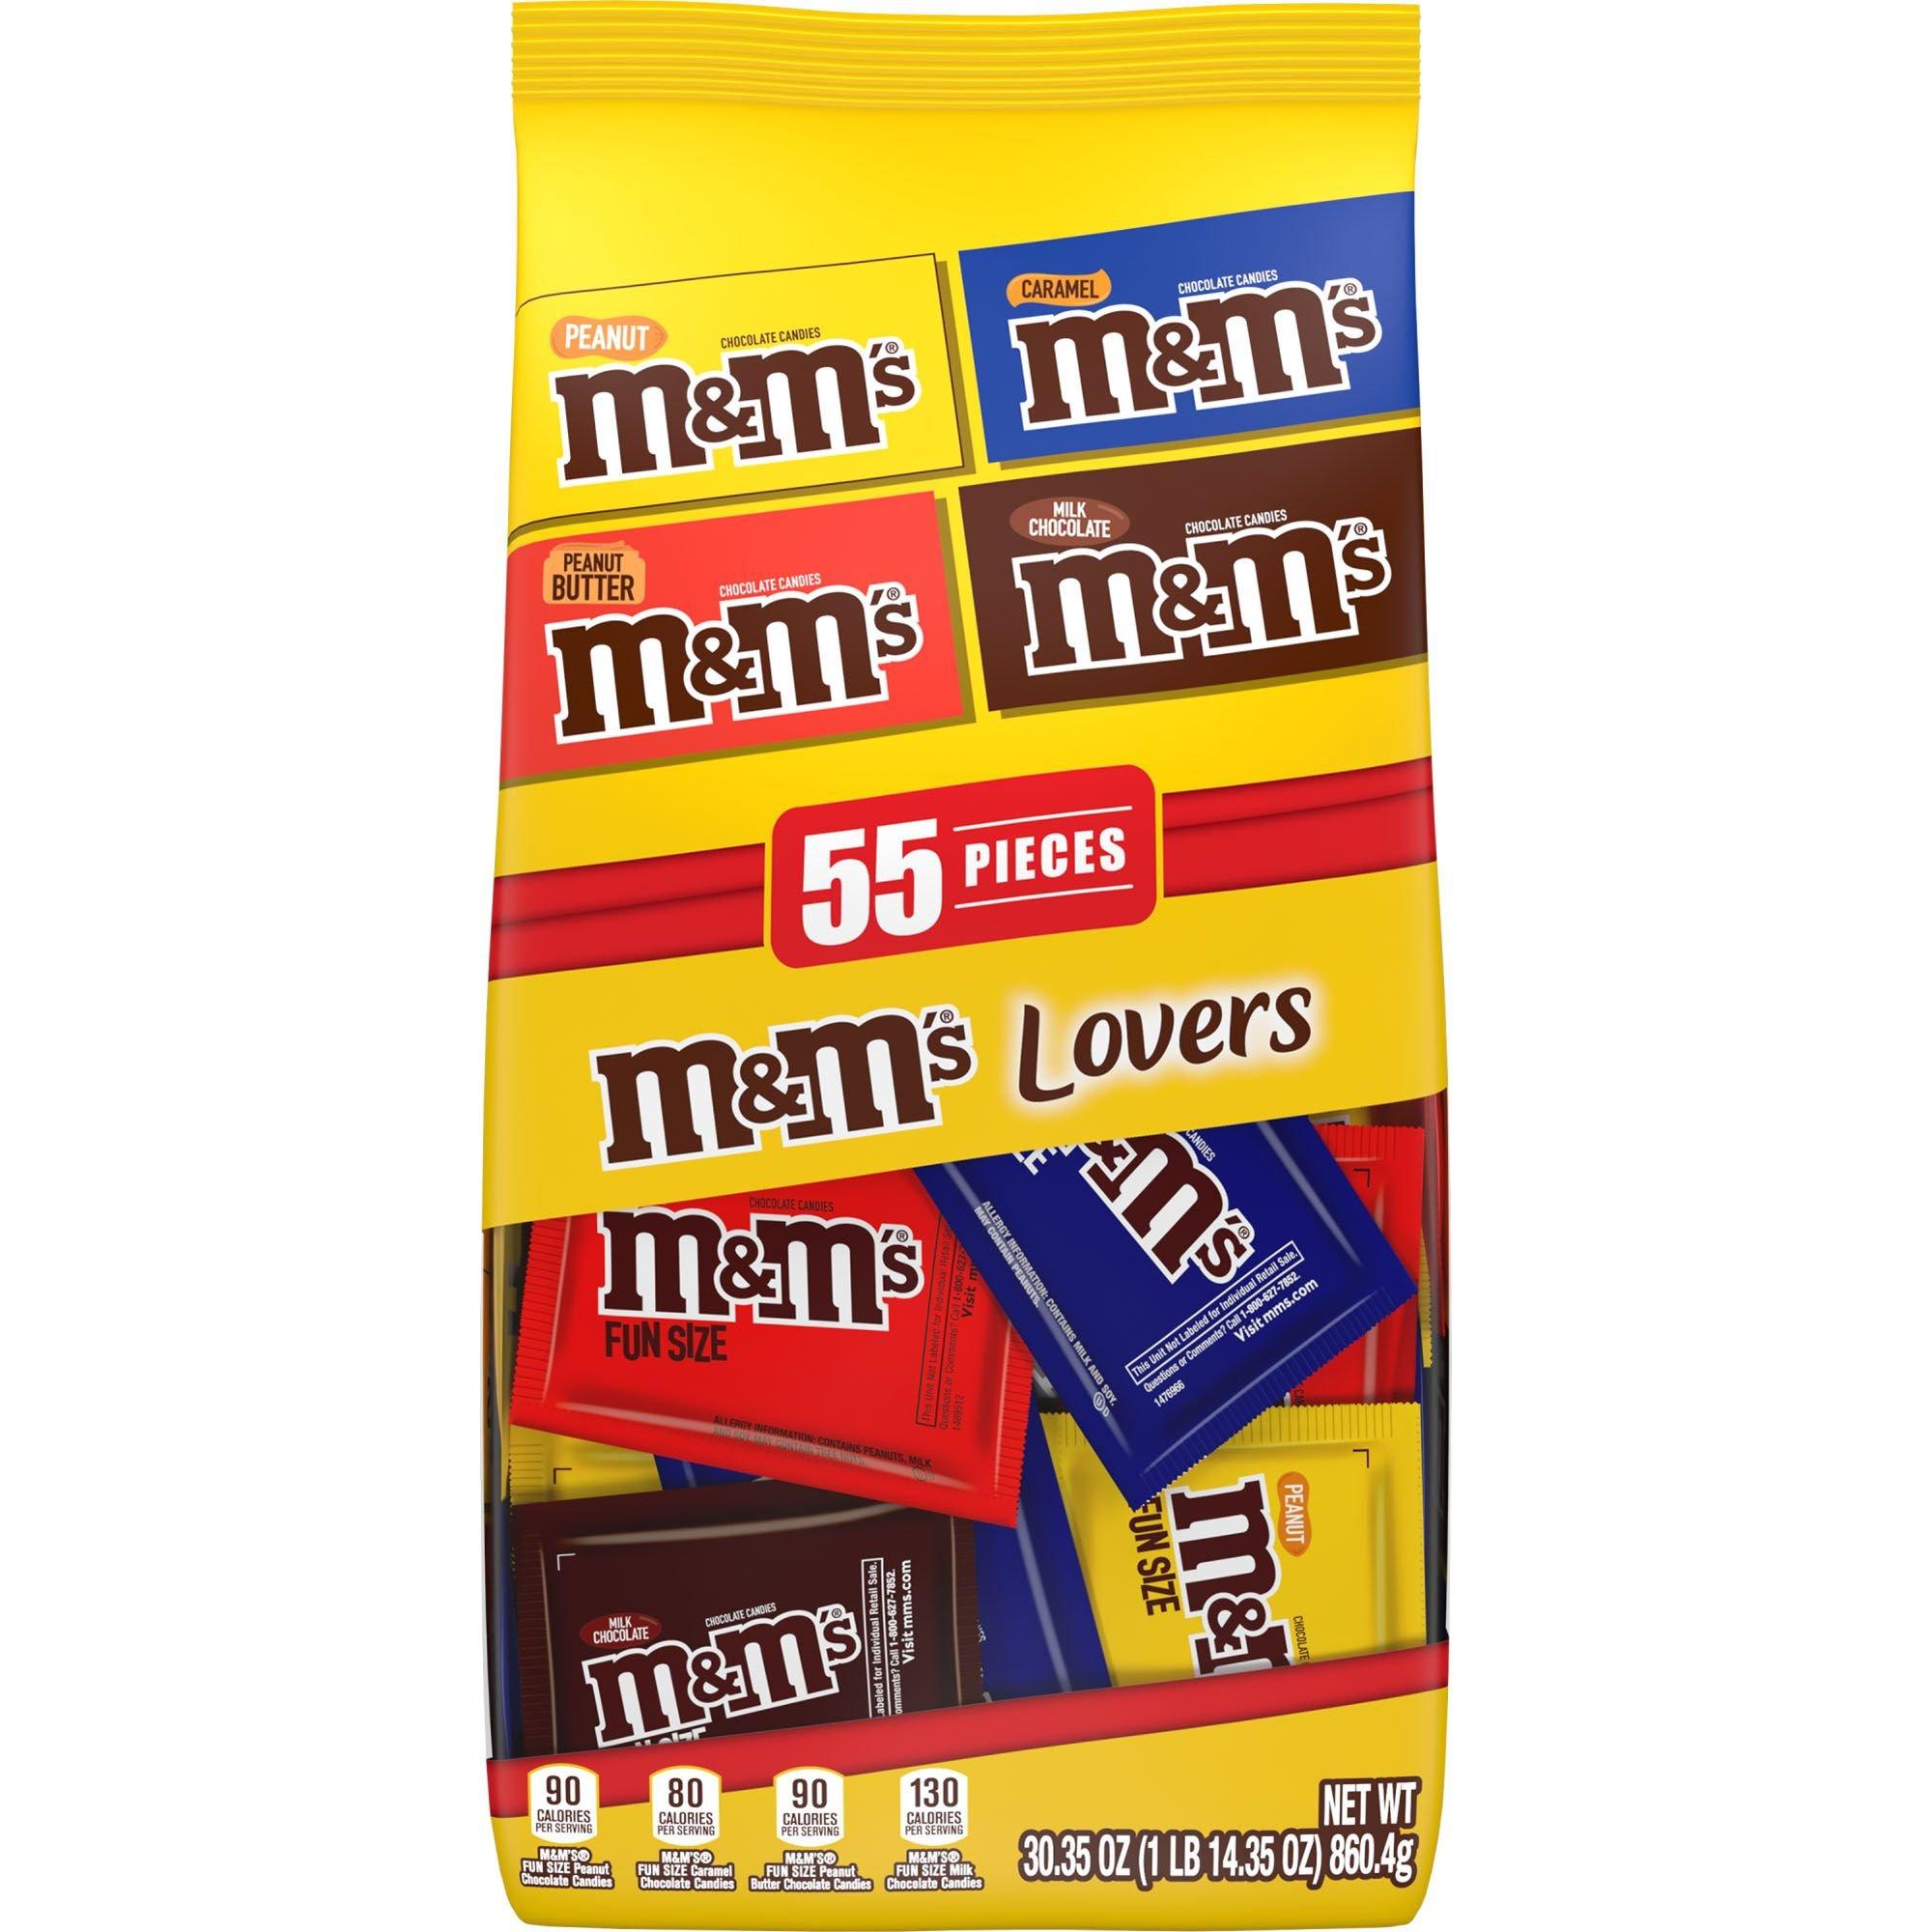  M&M'S Peanut Butter Milk Chocolate Candy, Family Size